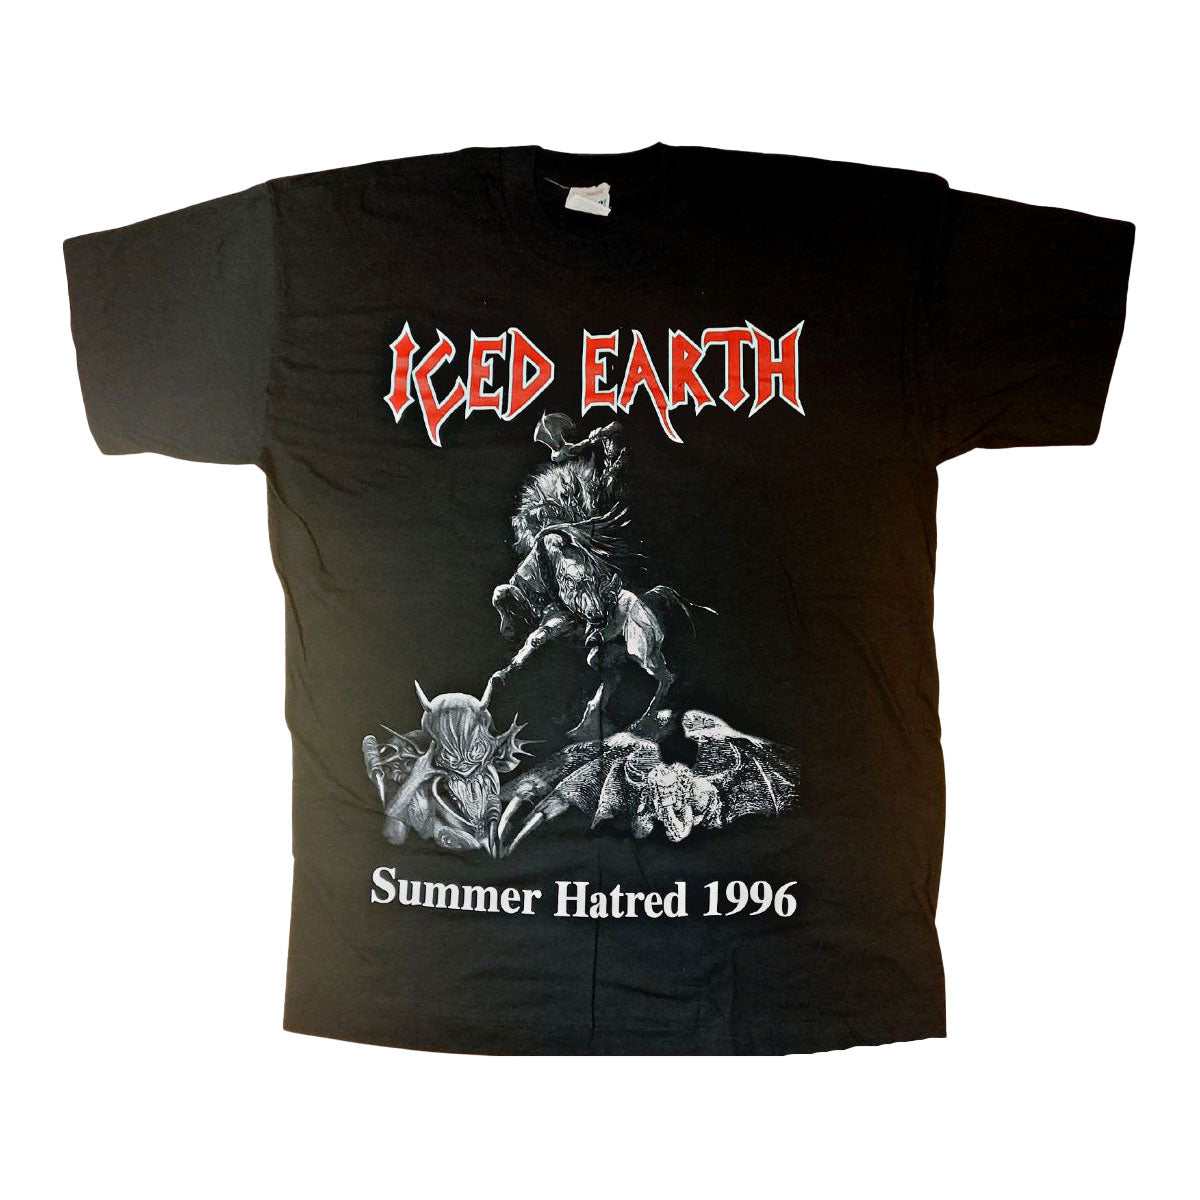 ICED EARTH Summer Hatred 96 T-Shirt